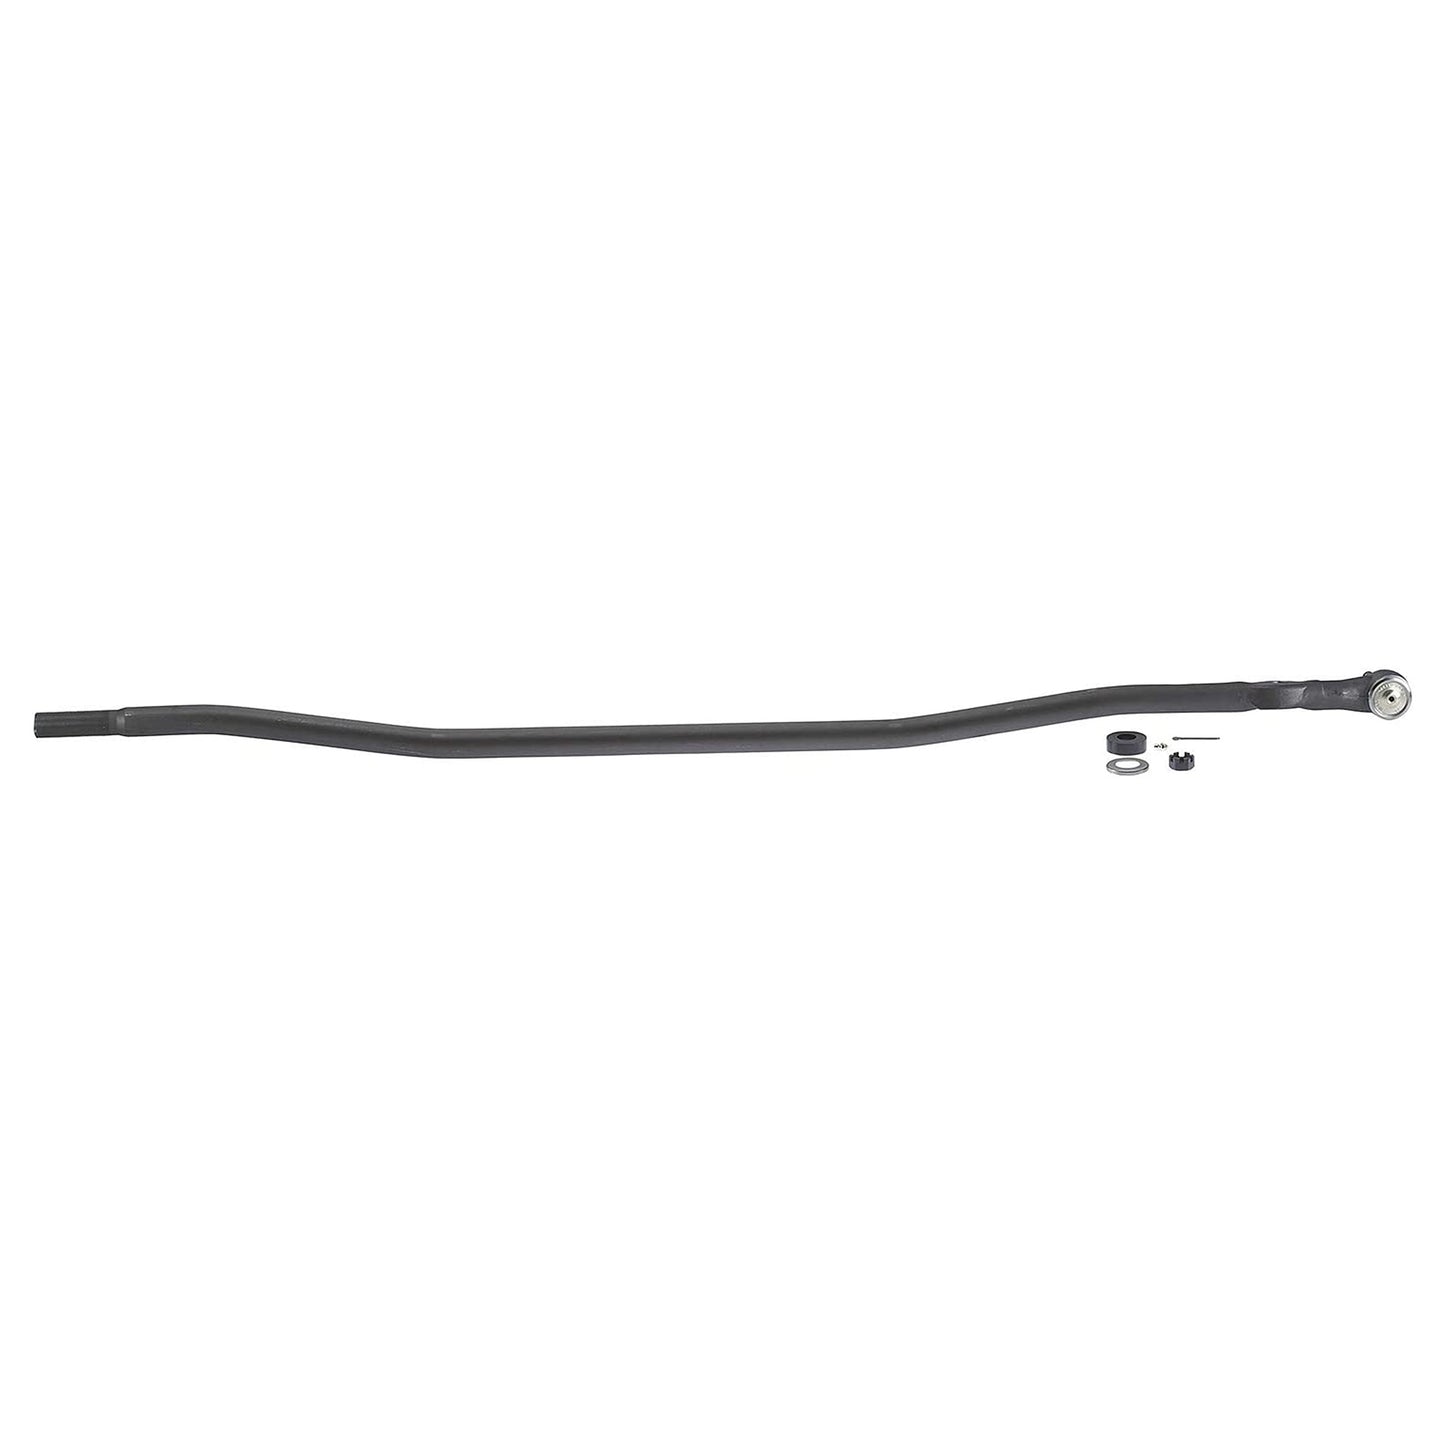 RIGHT OUTER TIE ROD, 1980-1997 FORD, DANA 60, DS1071